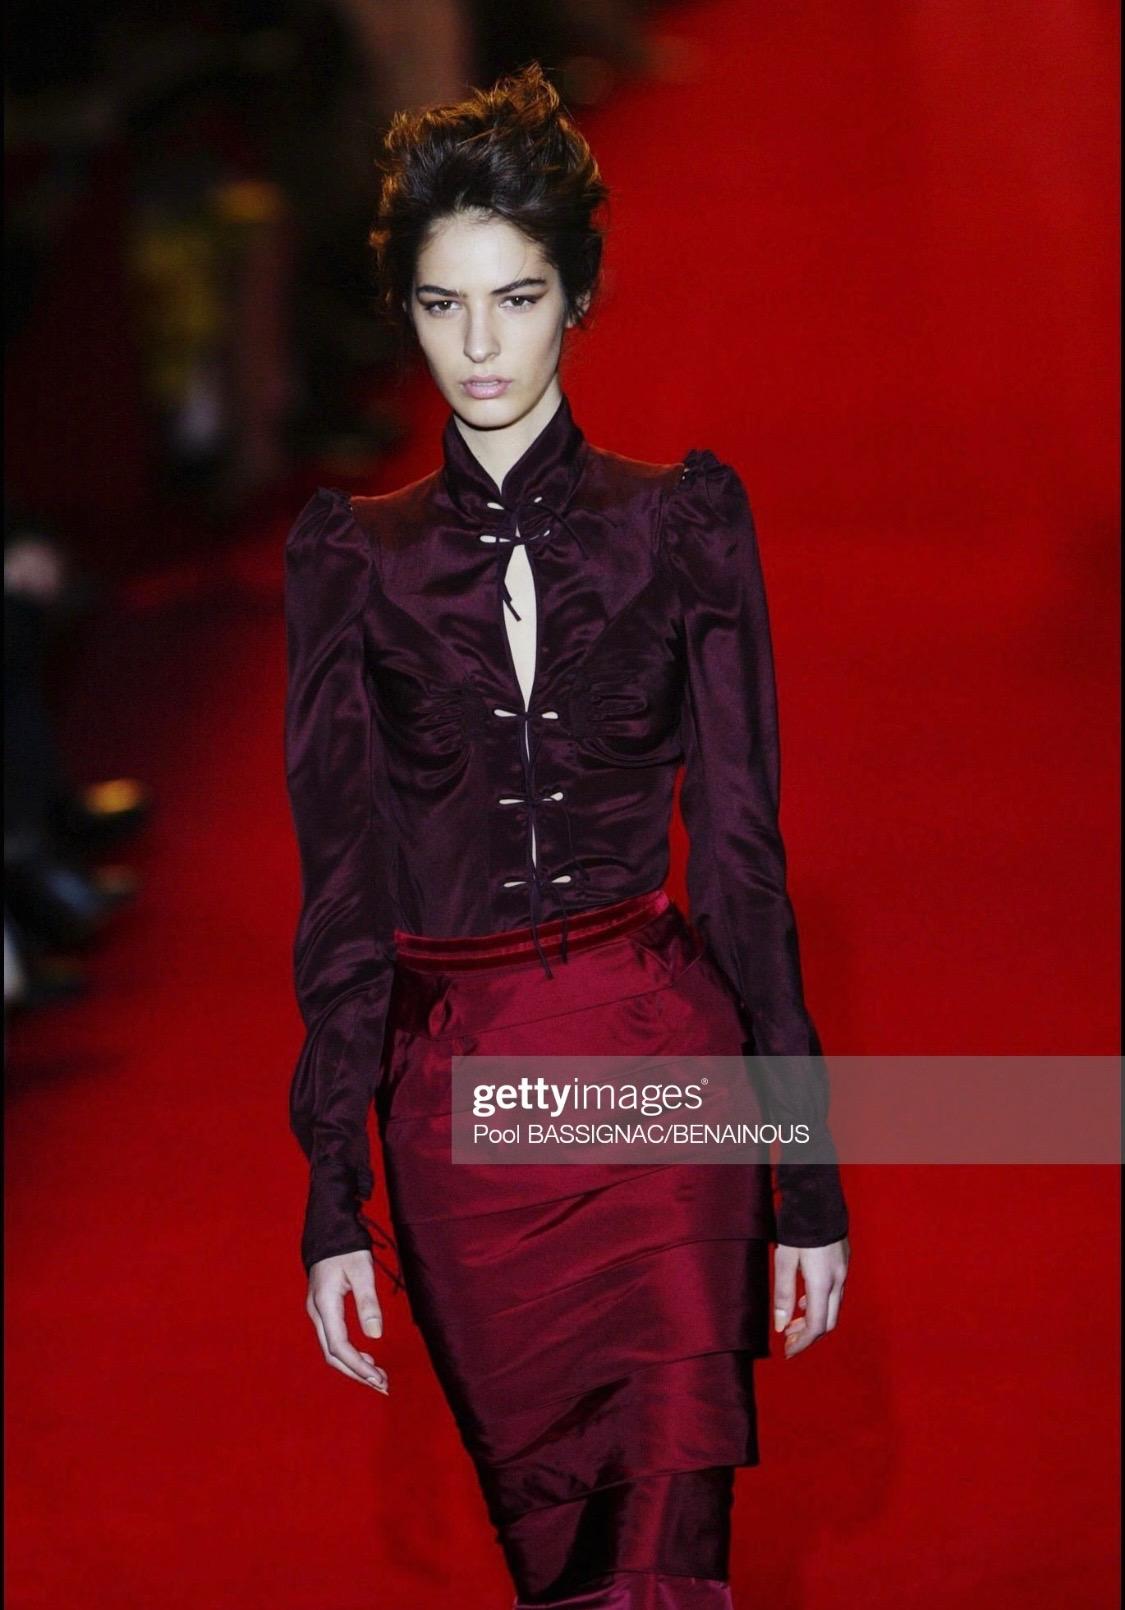 Presenting a gorgeous silk sleeveless top designed by Tom Ford for Yves Saint Laurent Rive Gauche's Fall/Winter 2004 collection. A reference to Yves Saint Laurent's infamous Fall/Winter 1977 'Les Chinoises' collection, Ford's iconic Fall/Winter 2004